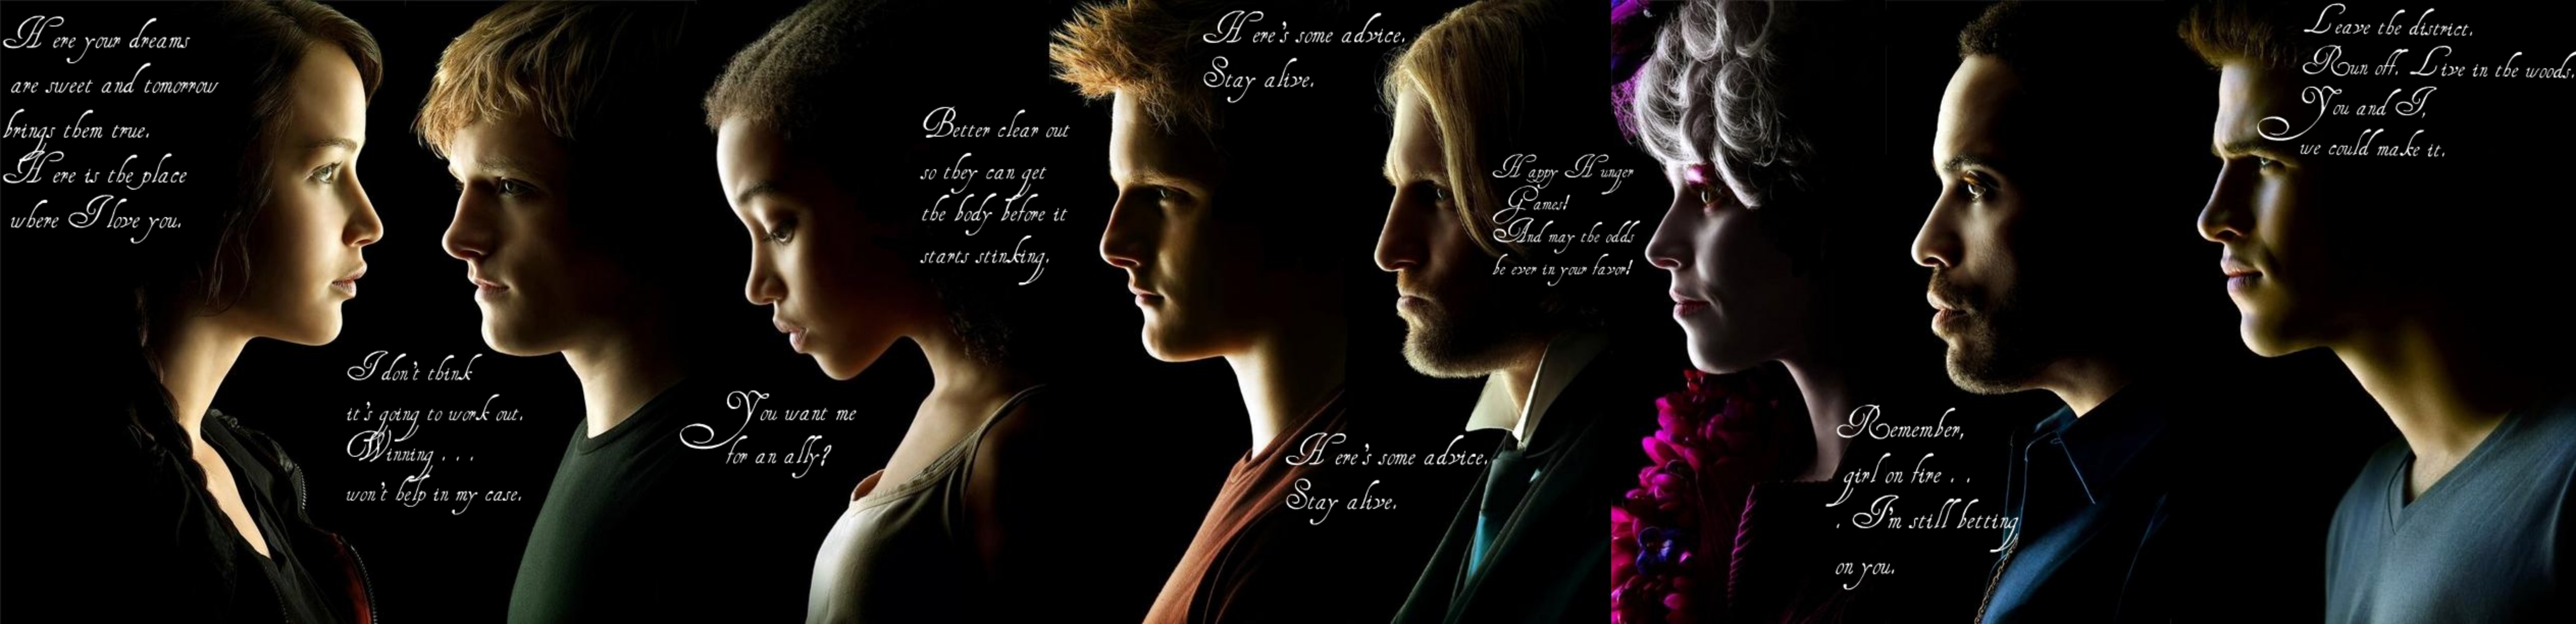 Cato Hunger Games Quotes.